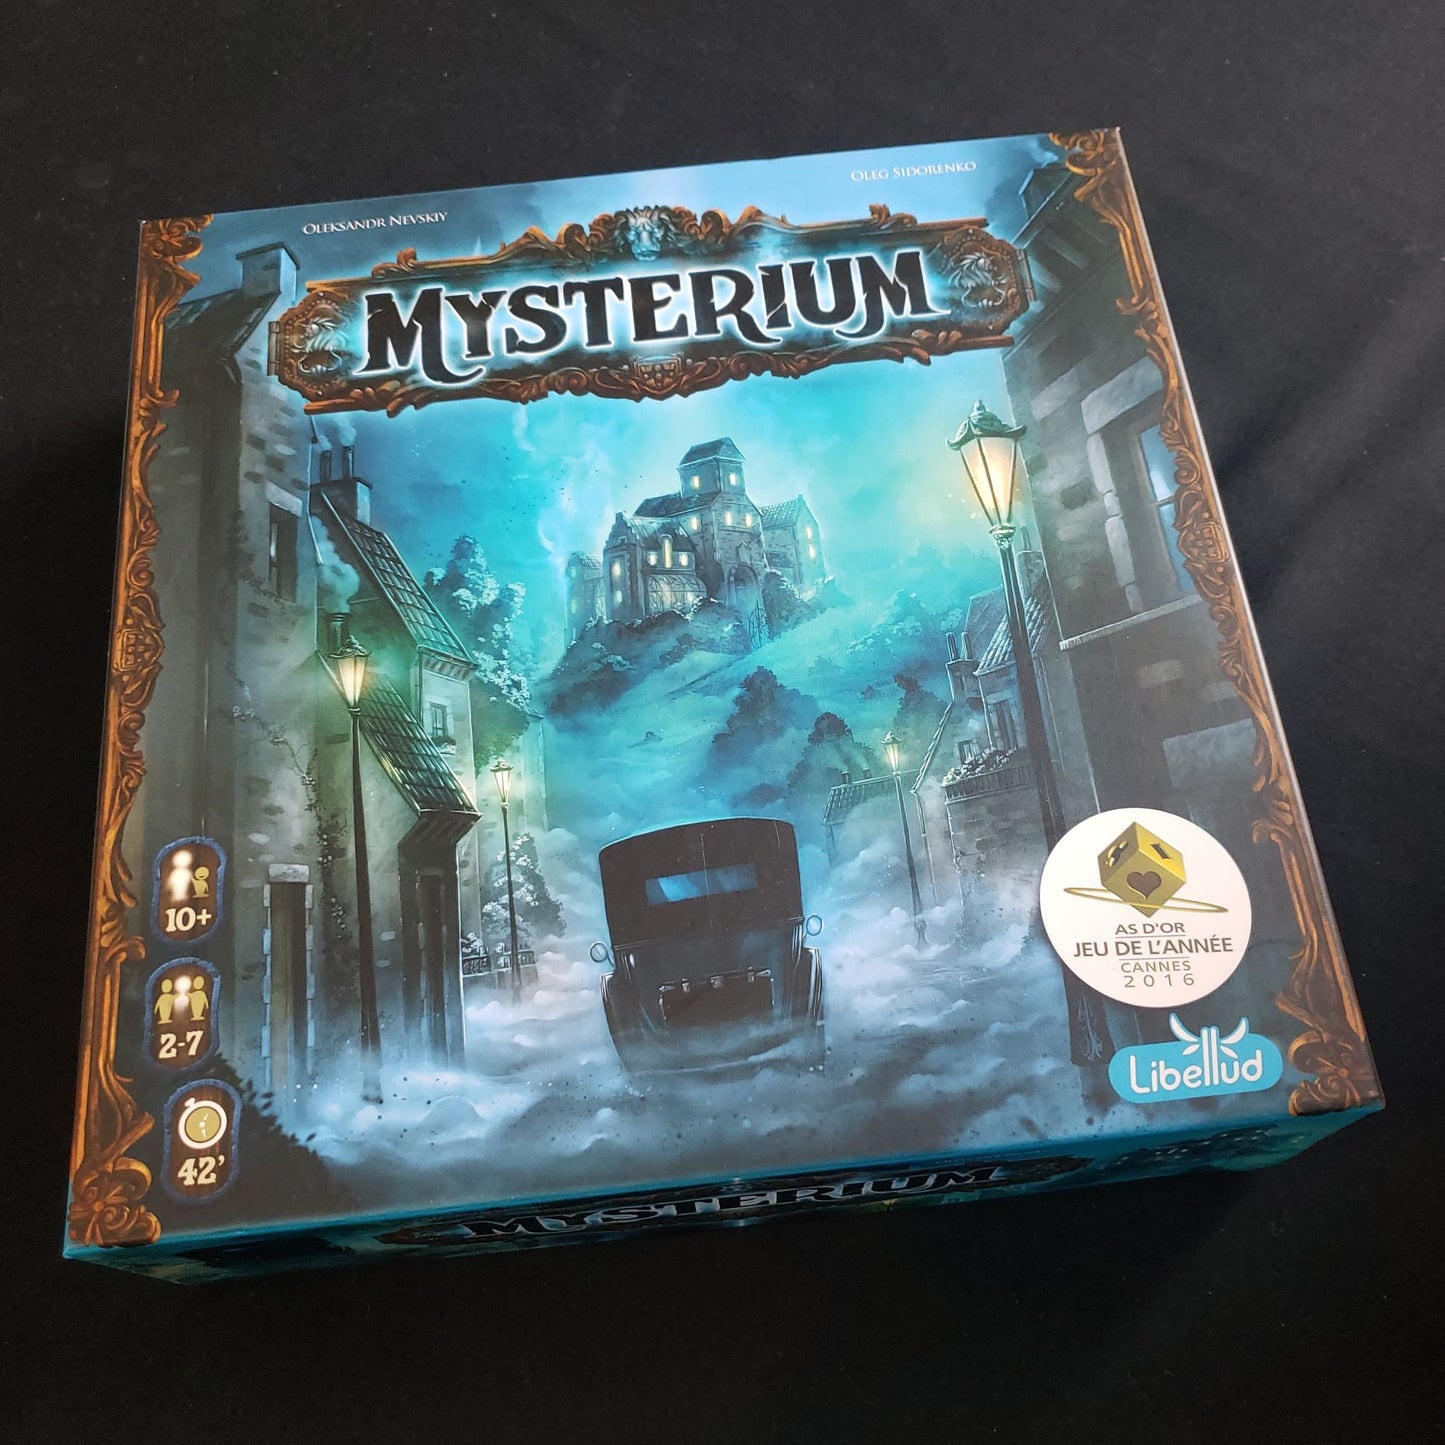 Mysterium board game - front cover of box